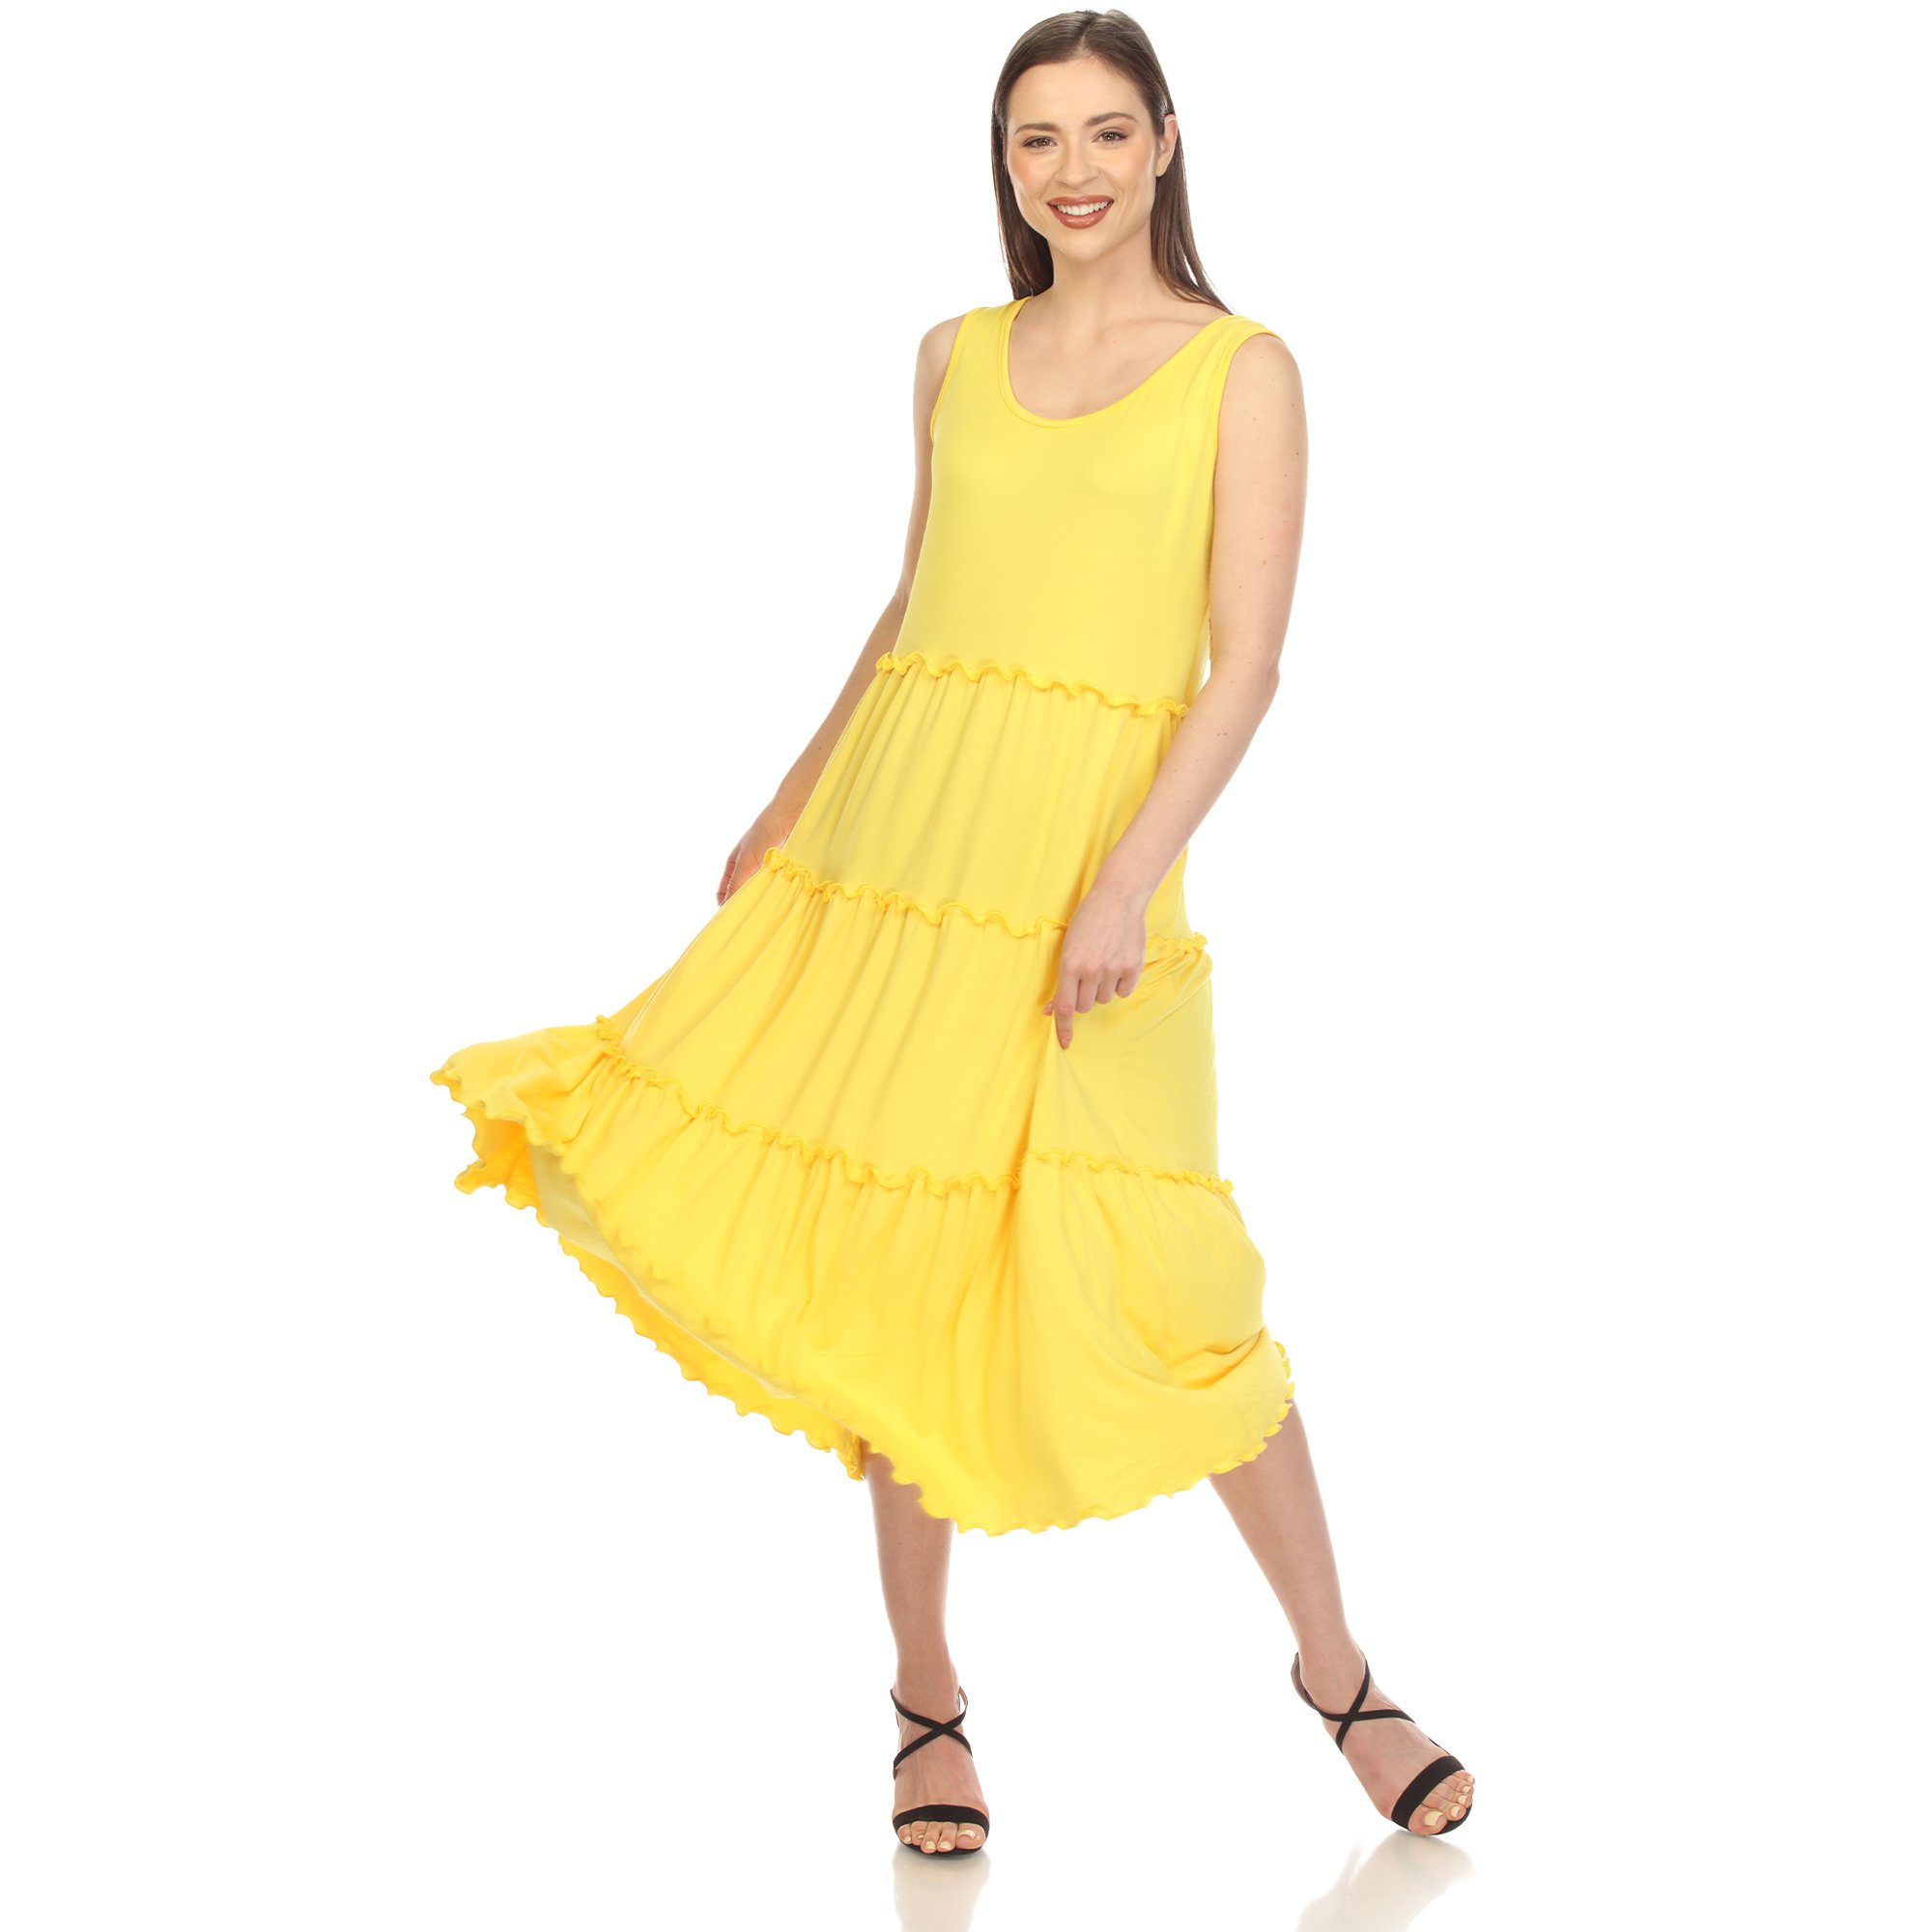 White Mark Women's Scoop Neck Tiered Midi Dress - Canary Yellow, Large